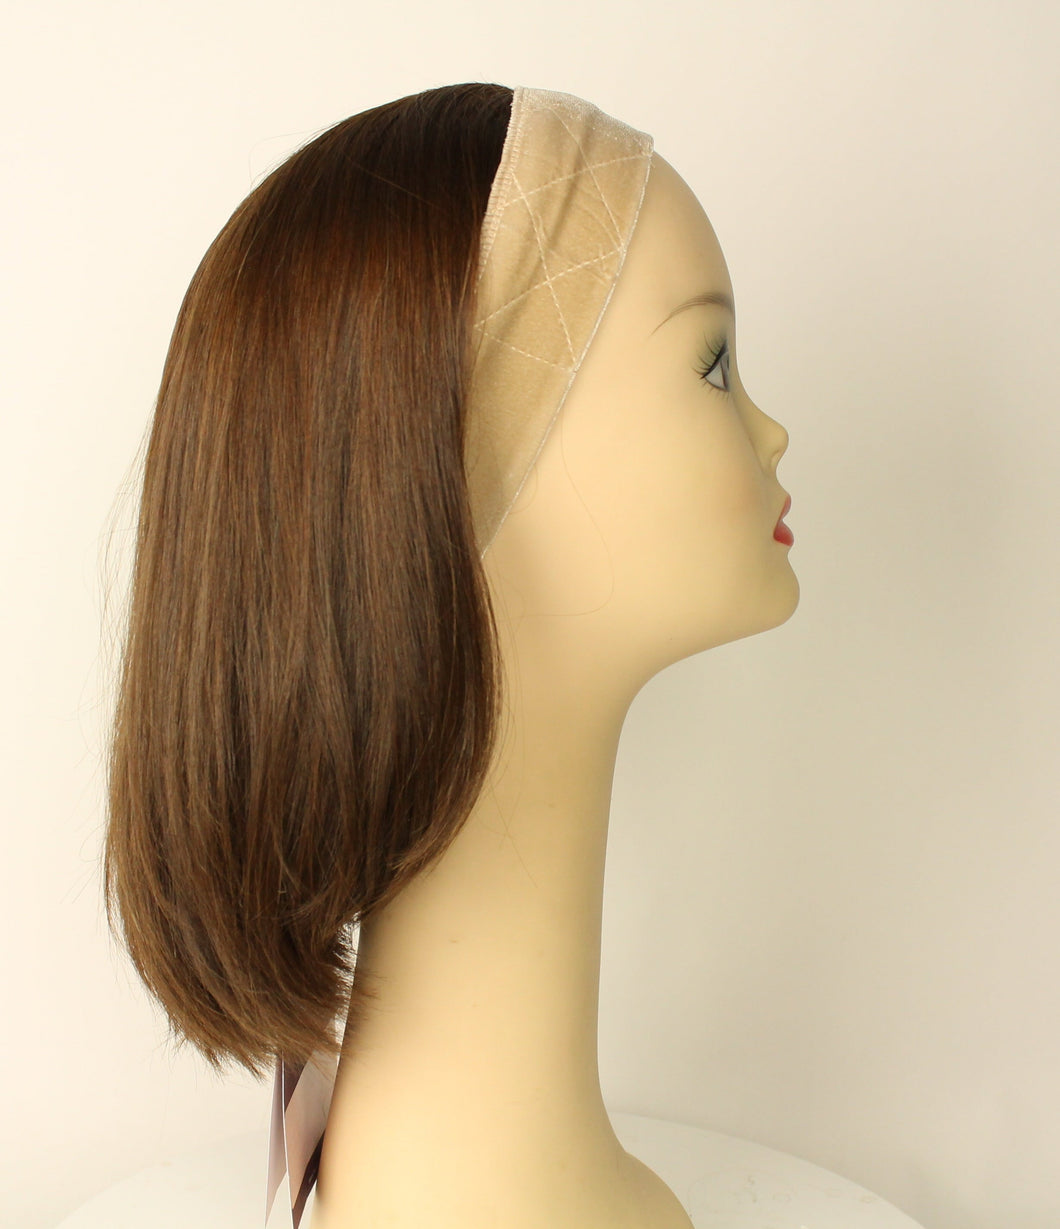 Avalon Fall Light Brown With Reddish Highlights Size X-L